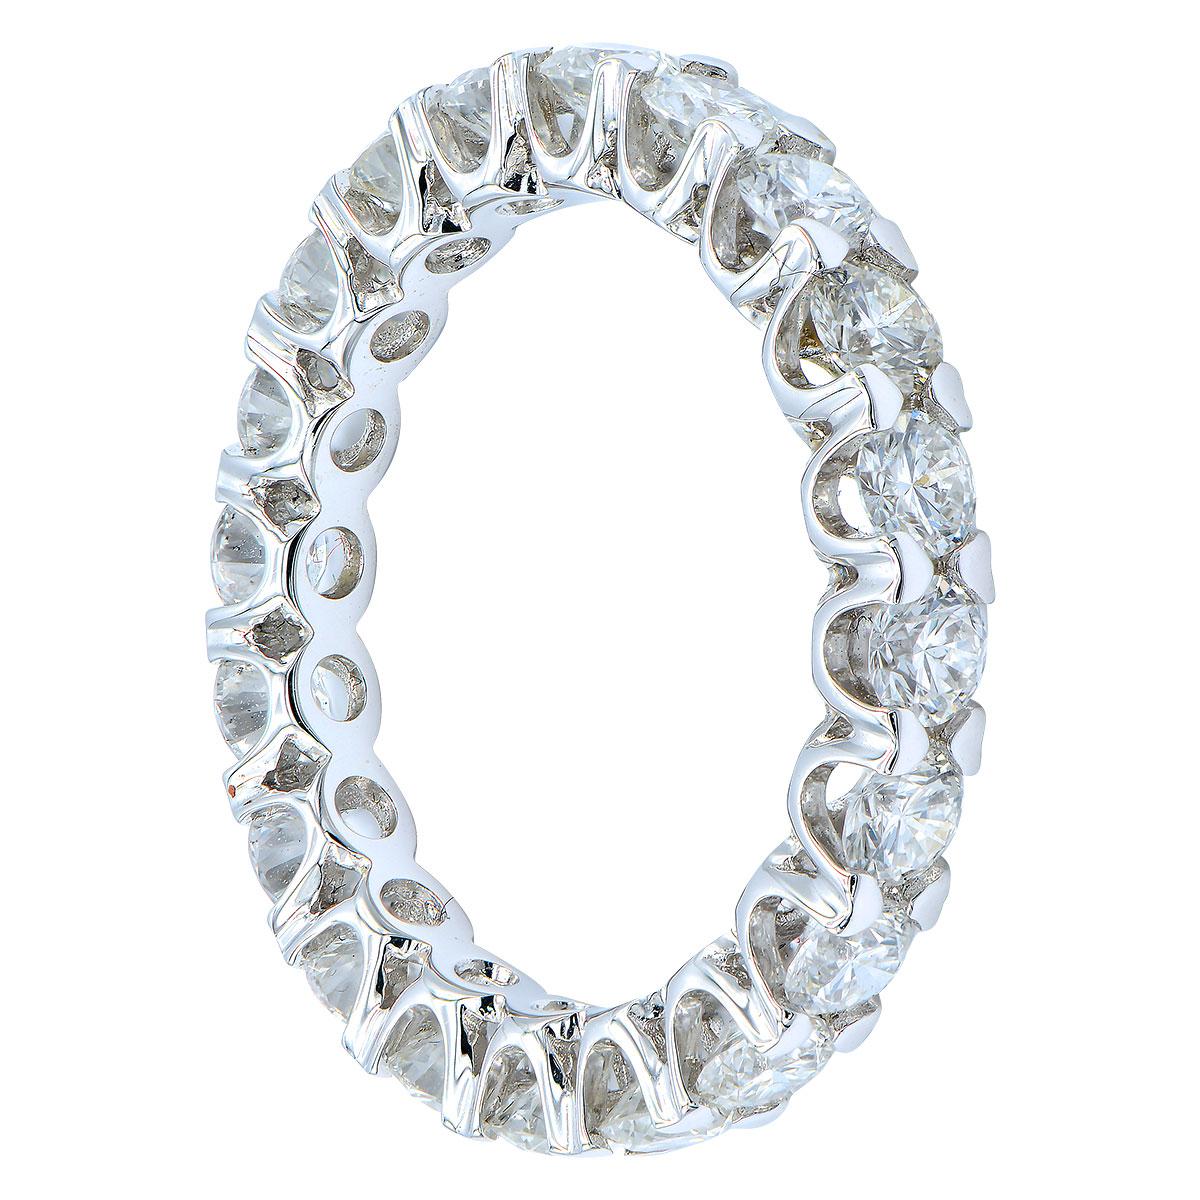 This gorgeous eternity band has 21 round VS2, G color diamonds that completely circle the band totaling 2.20 carats. The diamonds are set in 2.6 grams of 18 karat white gold with beautiful stylish prongs securing the diamond. This band is size 7.5.